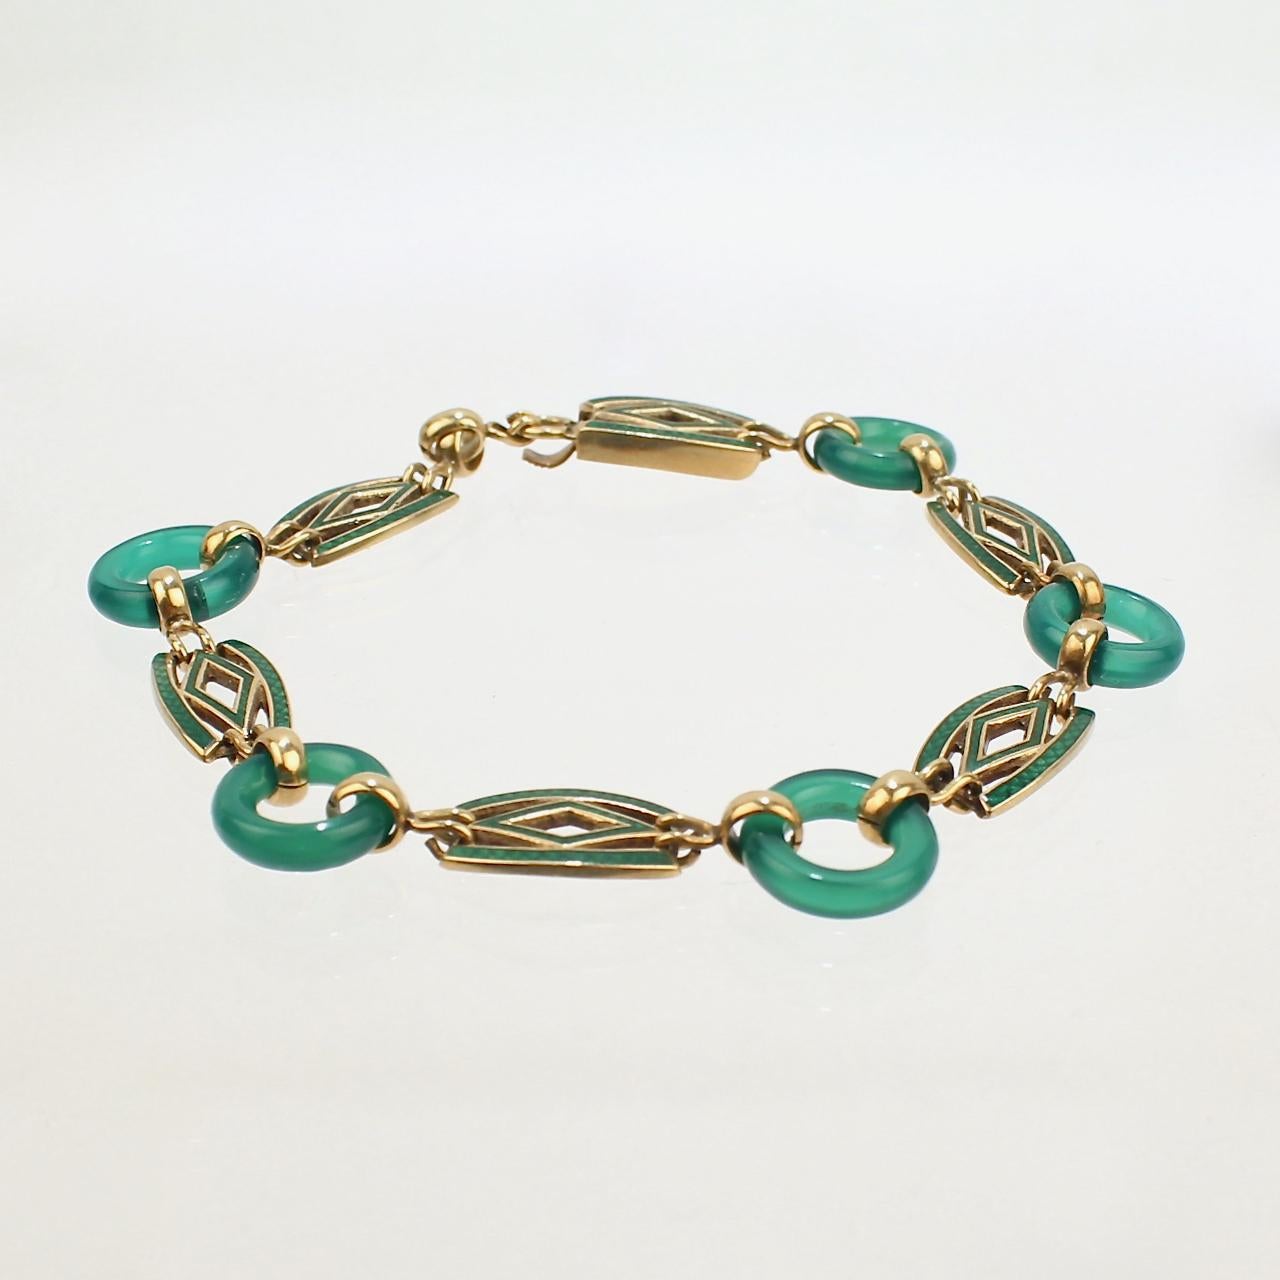 A very fine antique Edwardian link bracelet with alternating green enameled gold and small green jade ring links.

Marked for Smith & Pepper Goldsmiths.

Smith & Pepper were well regarded goldsmiths in the important jewelry city of Birmingham,